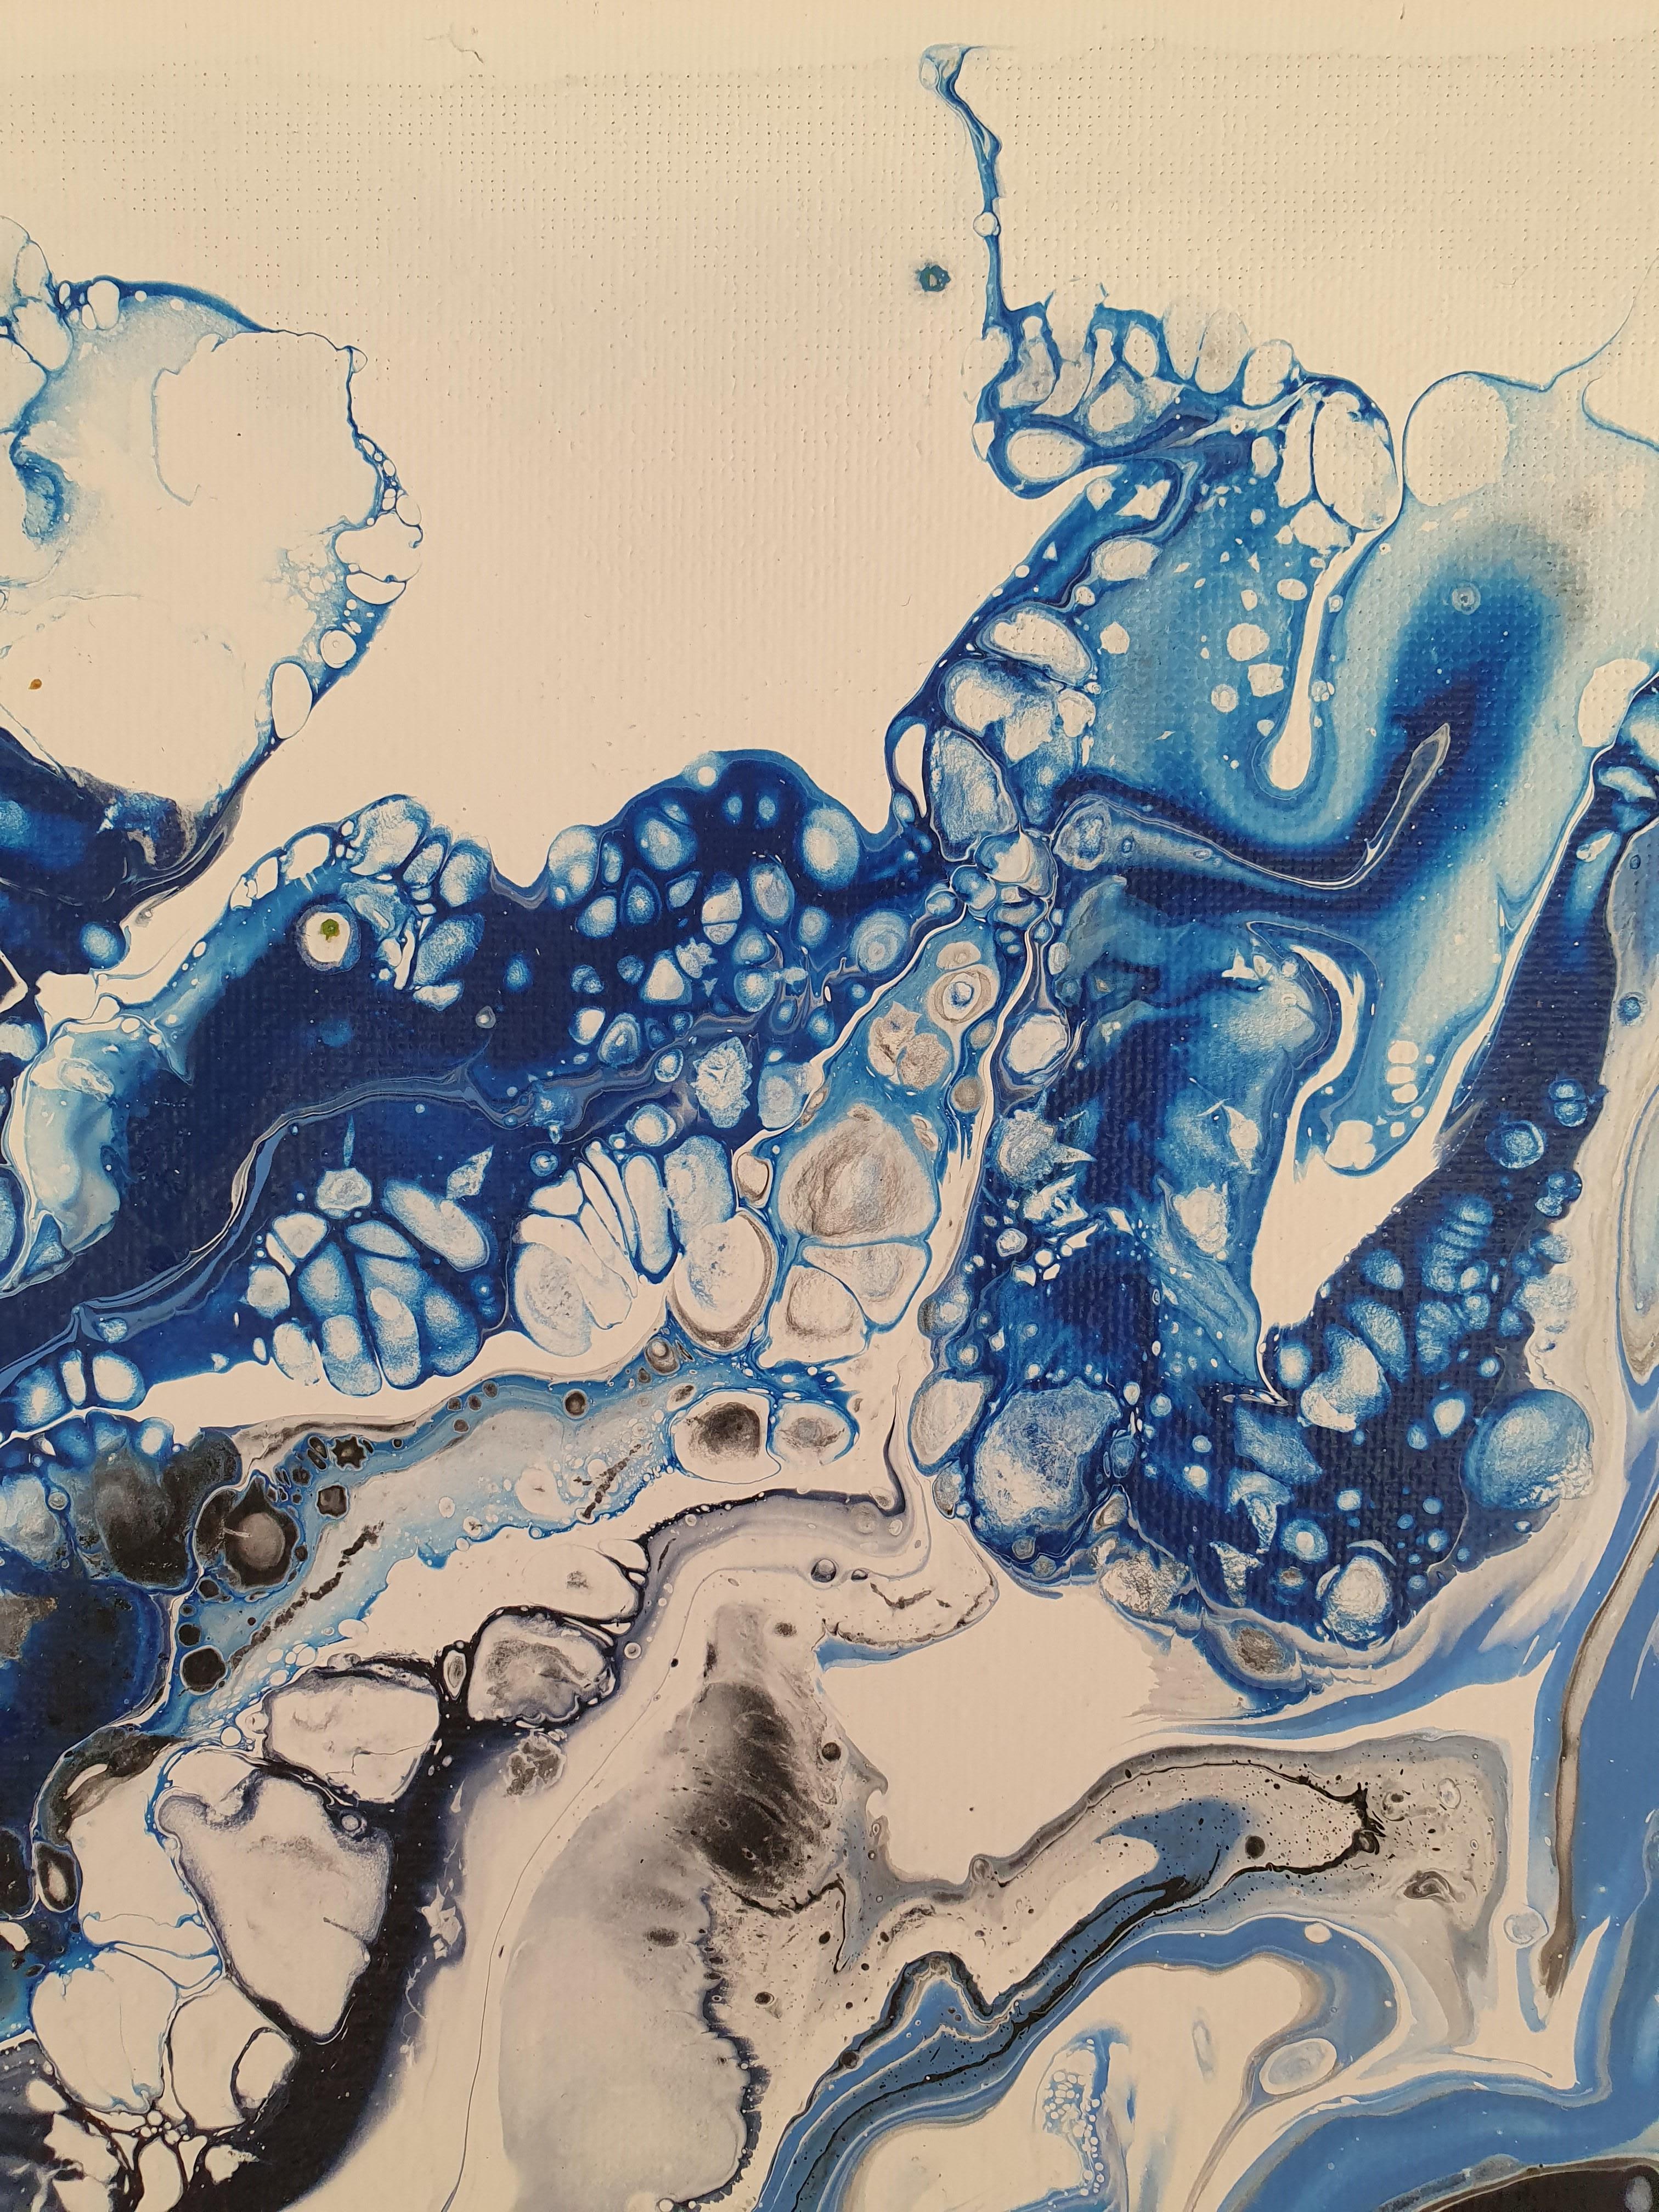 Title: Joyspring

Blue Ocean Water Free Blues Abstract Contemporary Striking Invest
Joyspring - An everlasting spring or fountain of joy.

While creating this work, the artist was transported to the sea, with its movement, abundance, and flow. It